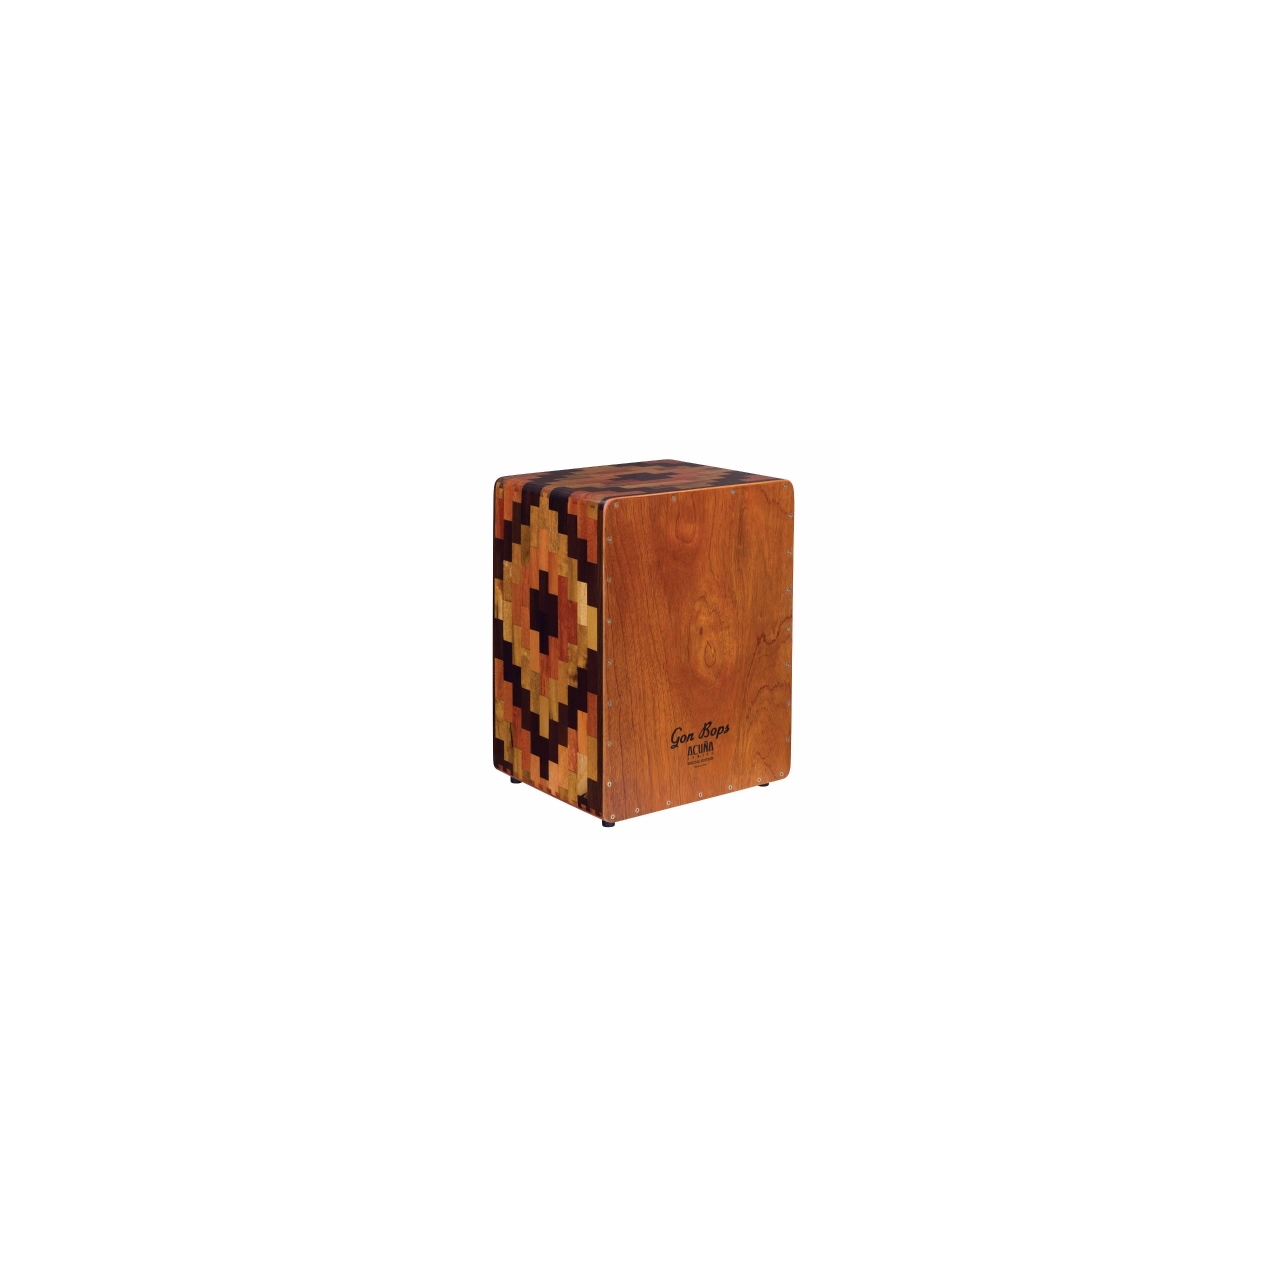 Gon Bops Cajon Alex Acuna Special Edition AACJSE